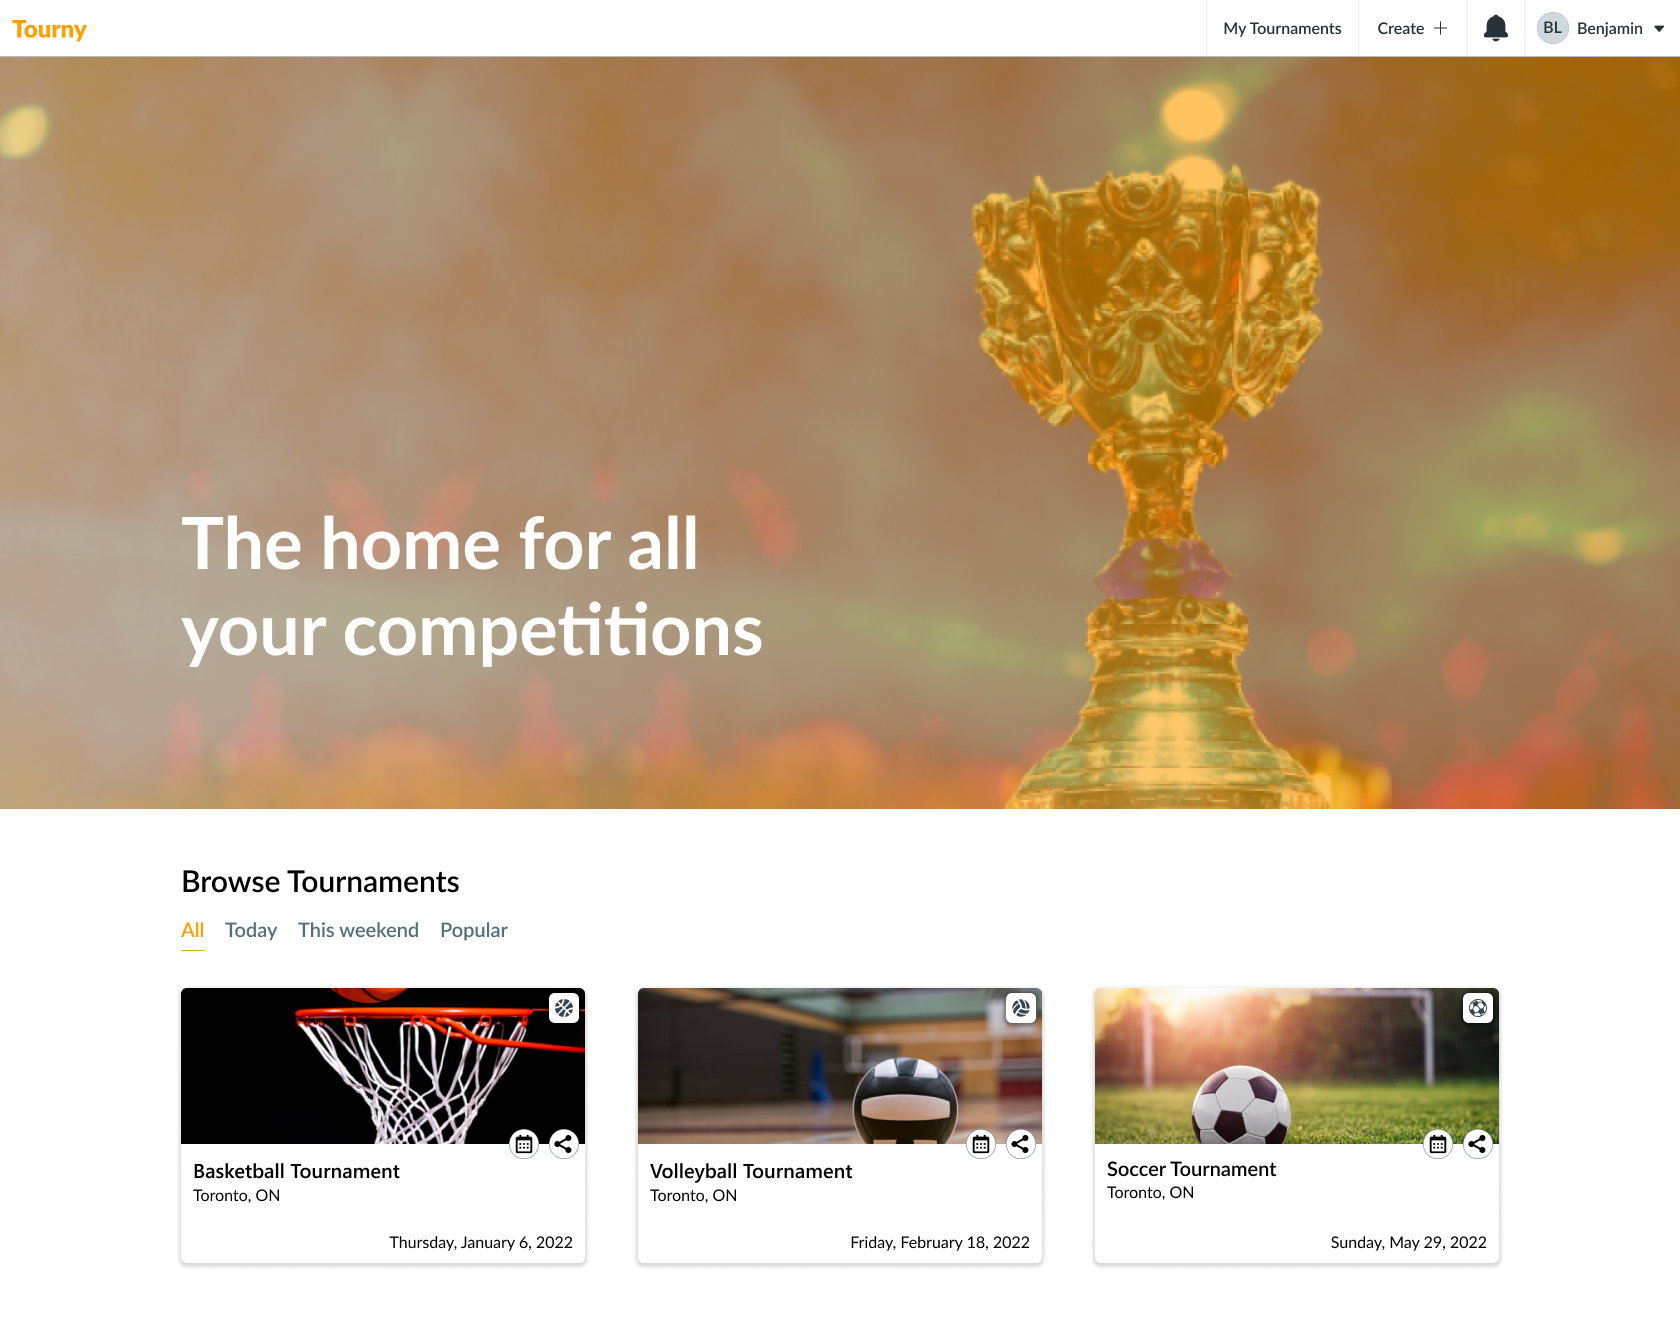 Screenshot of a design for the Showdown homepage featuring a banner image of a trophy with a browse tournament section below it.